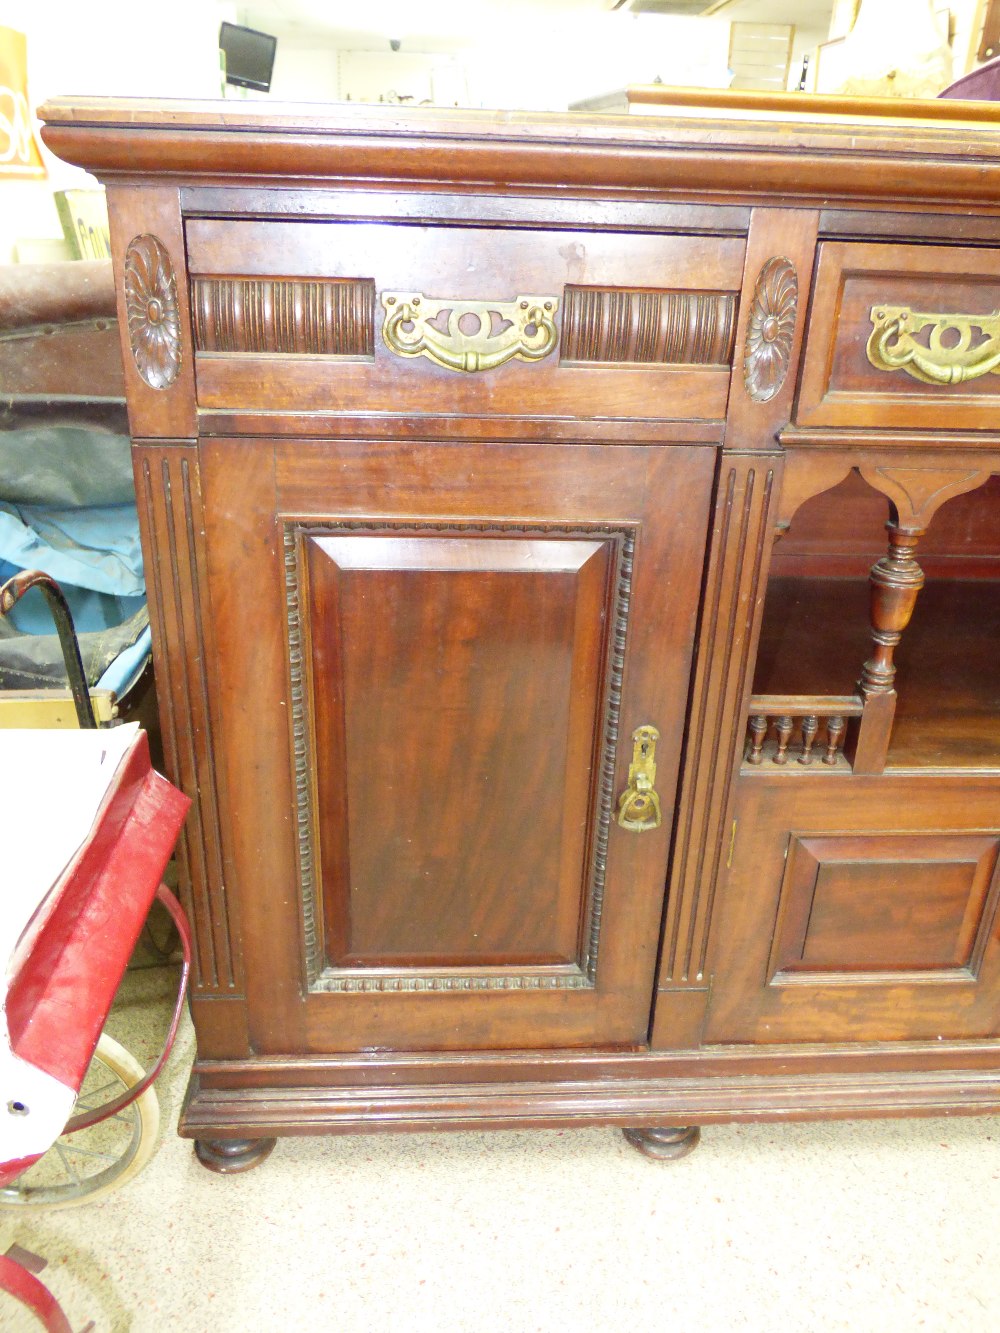 T SIMPSON & SONS HALIFAX LARGE SIDEBOARD - Image 4 of 4